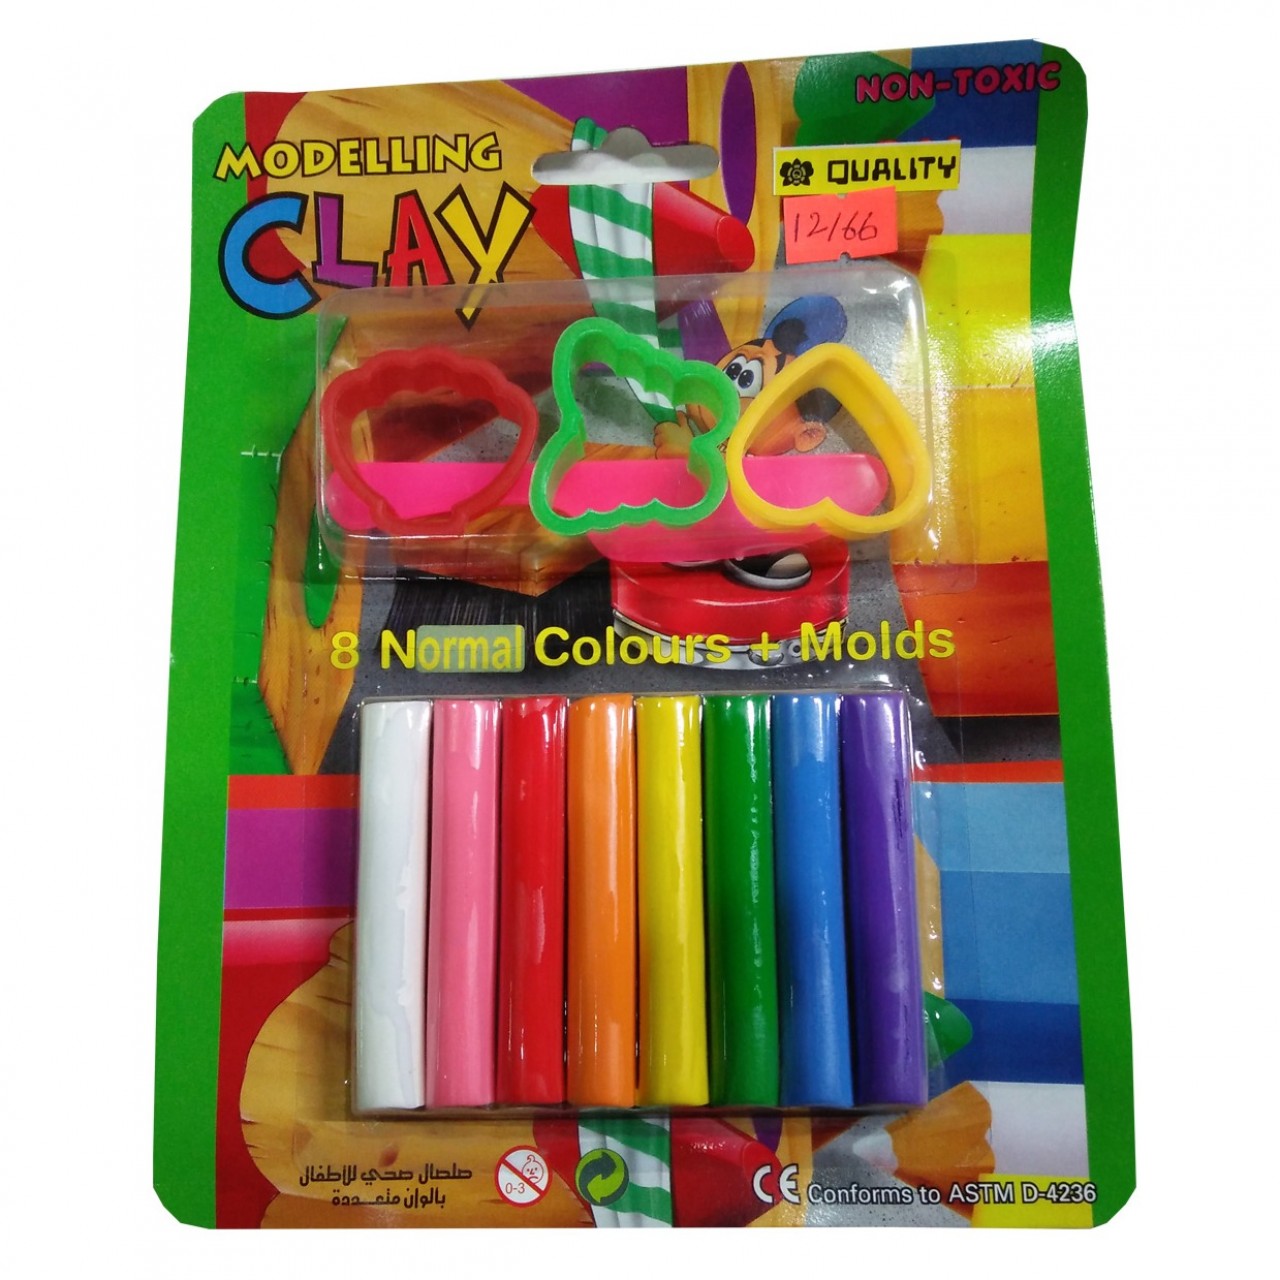 Non-Toxic Modelling Clay For Kids - 8 Normal Colors & Molds